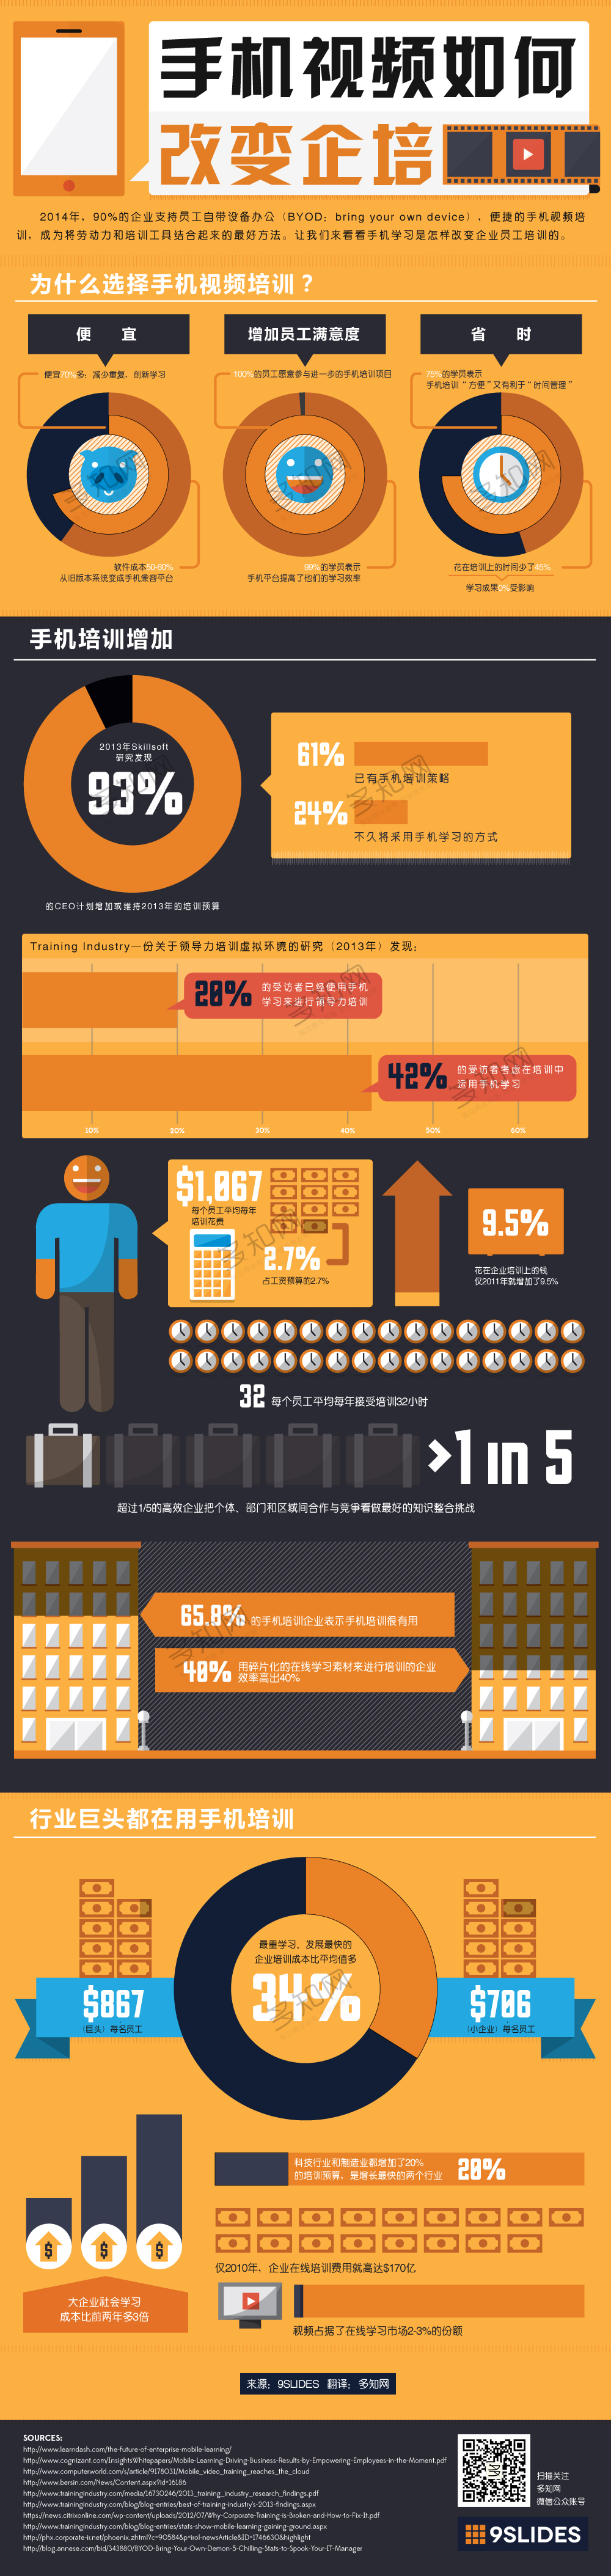 mobile-video-training-infographic-final